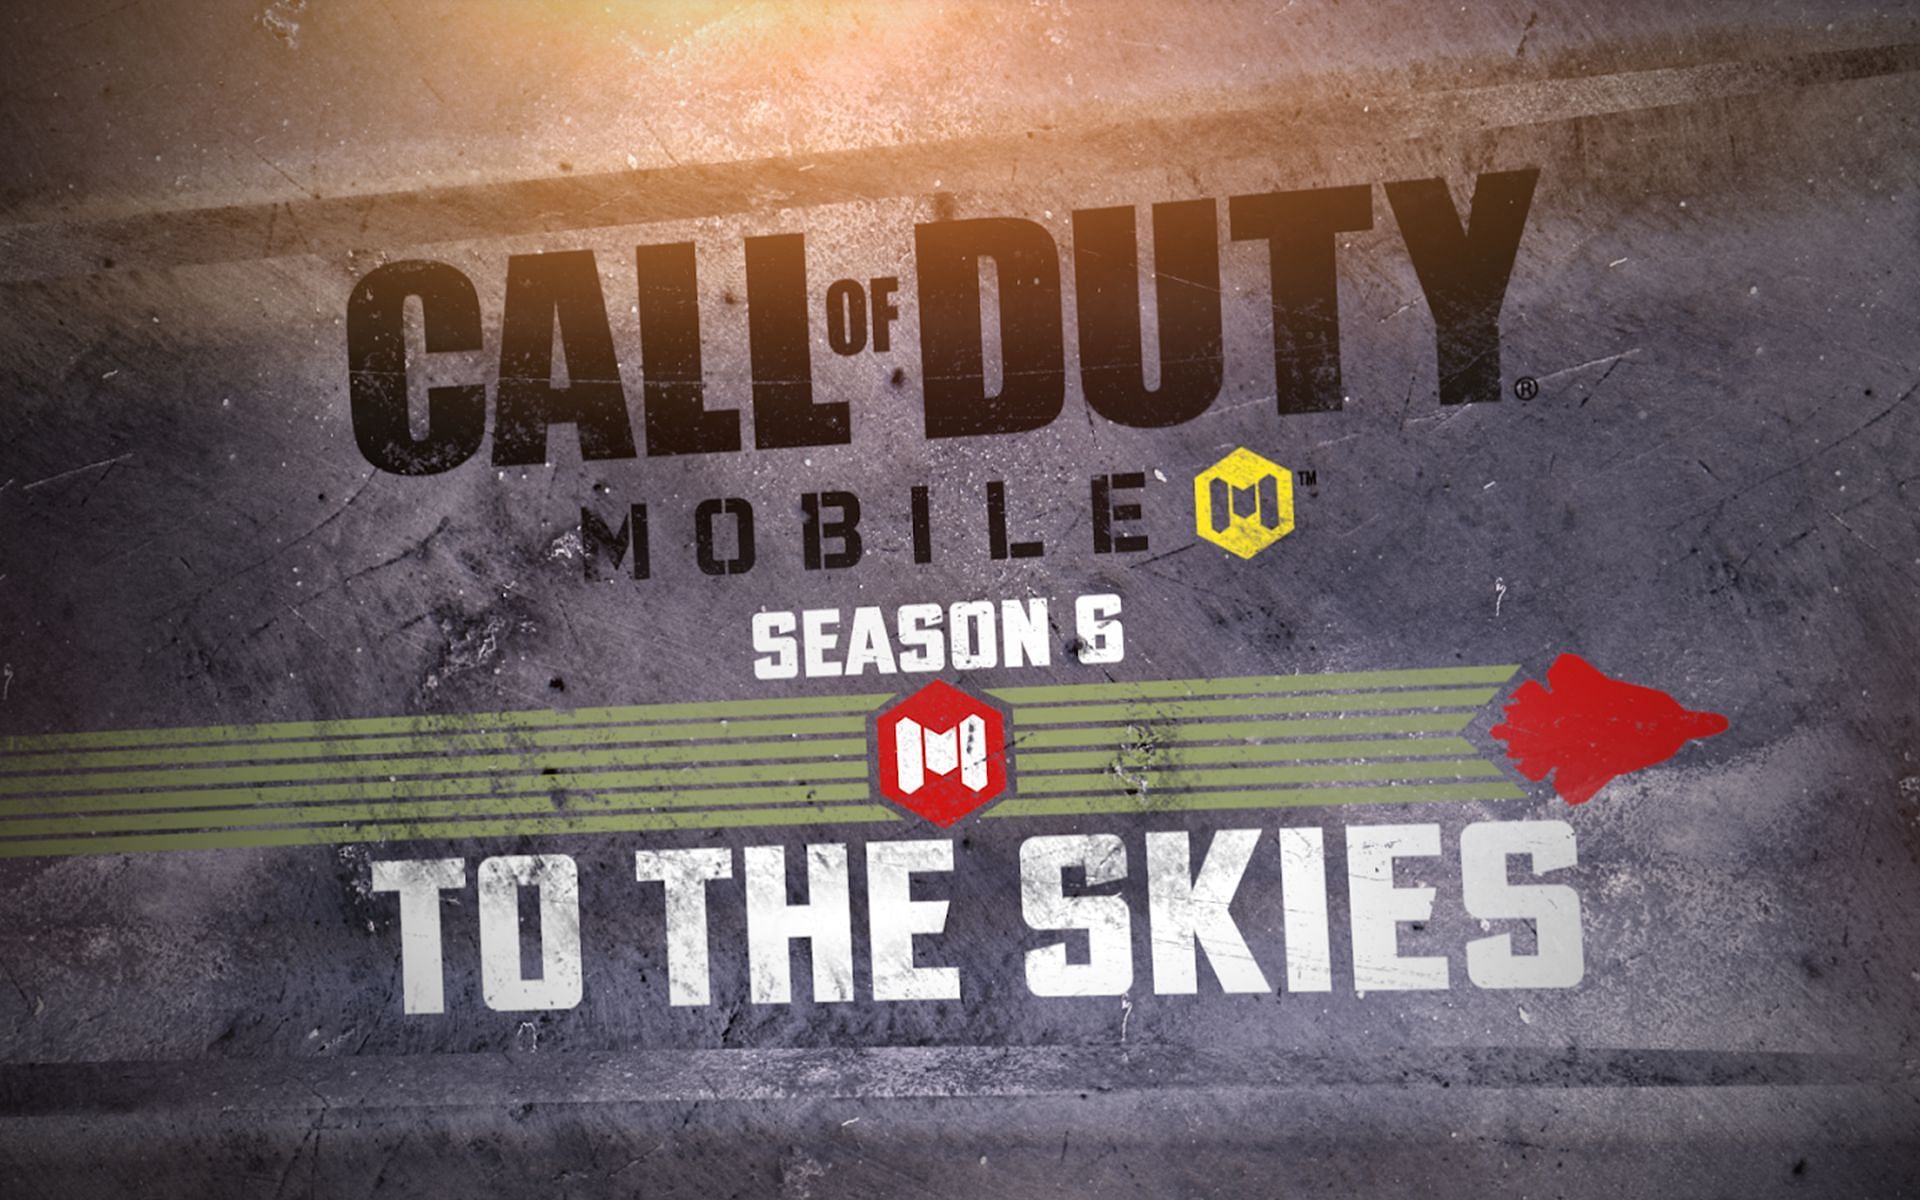 The theme of COD Mobile Season 6 is To The Skies (Image via Activision)